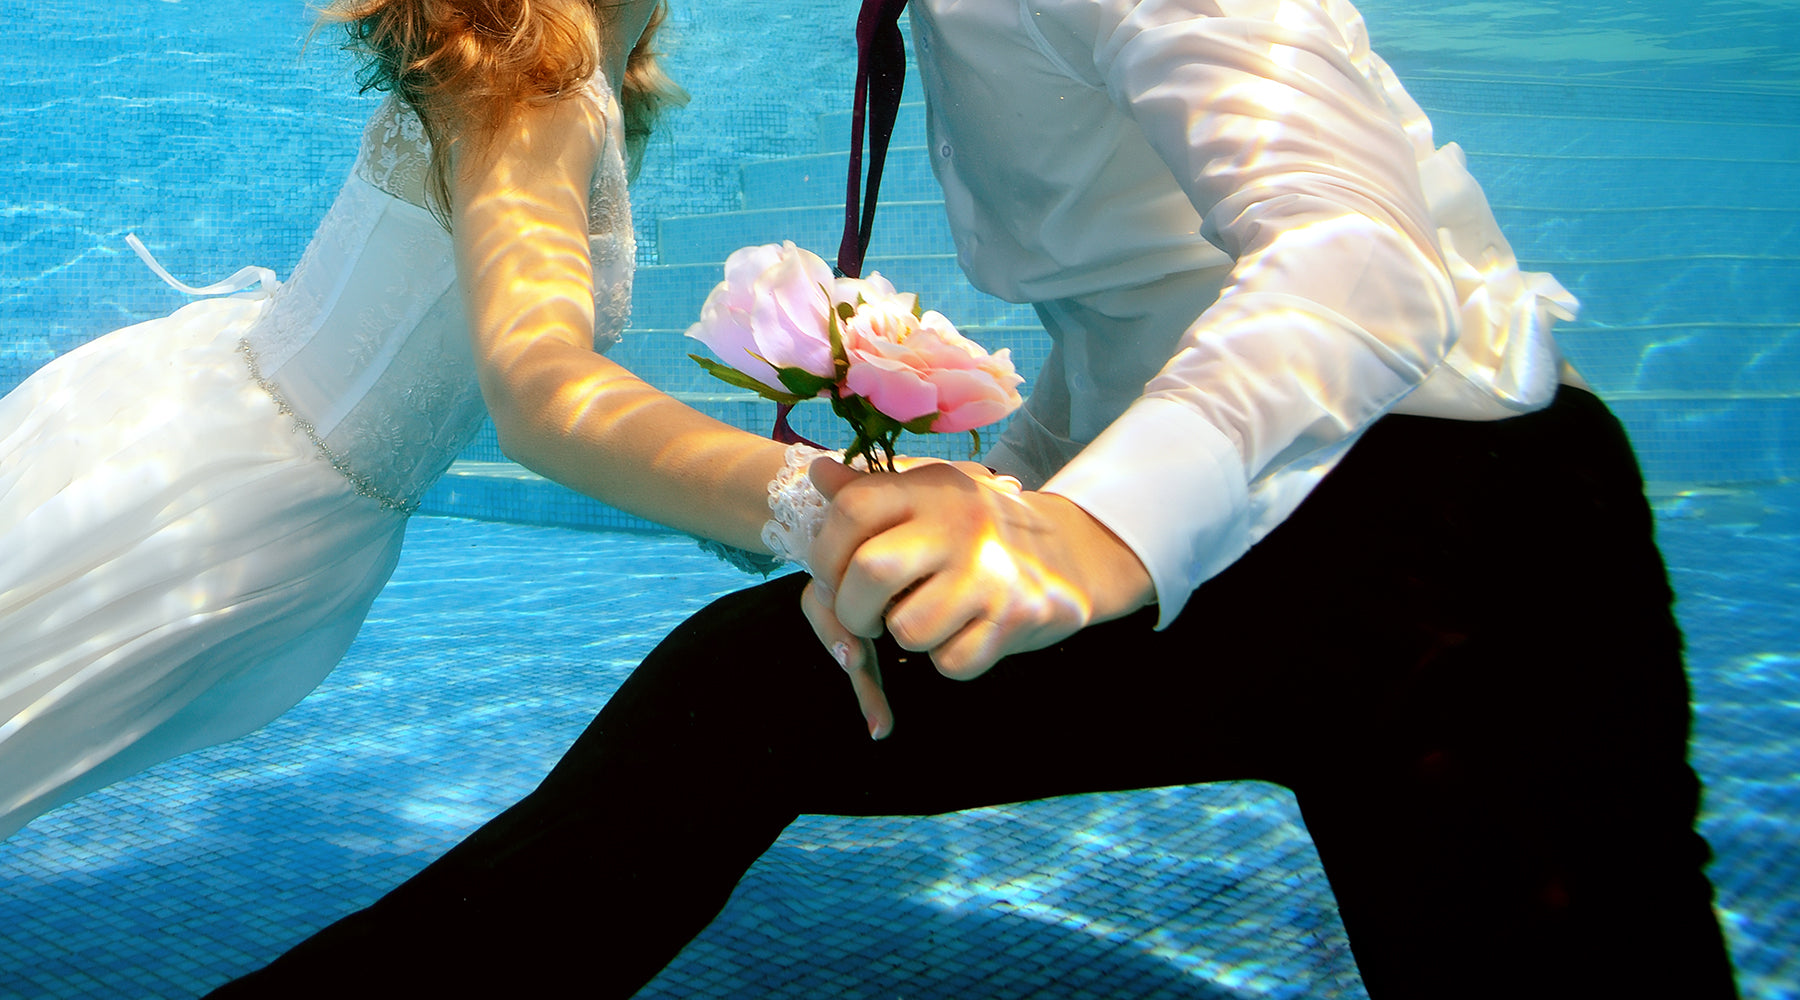 A bride in a white dress and groom in a white shirt with black pants hold a pink bouquet as they kiss under the water of a pool.  